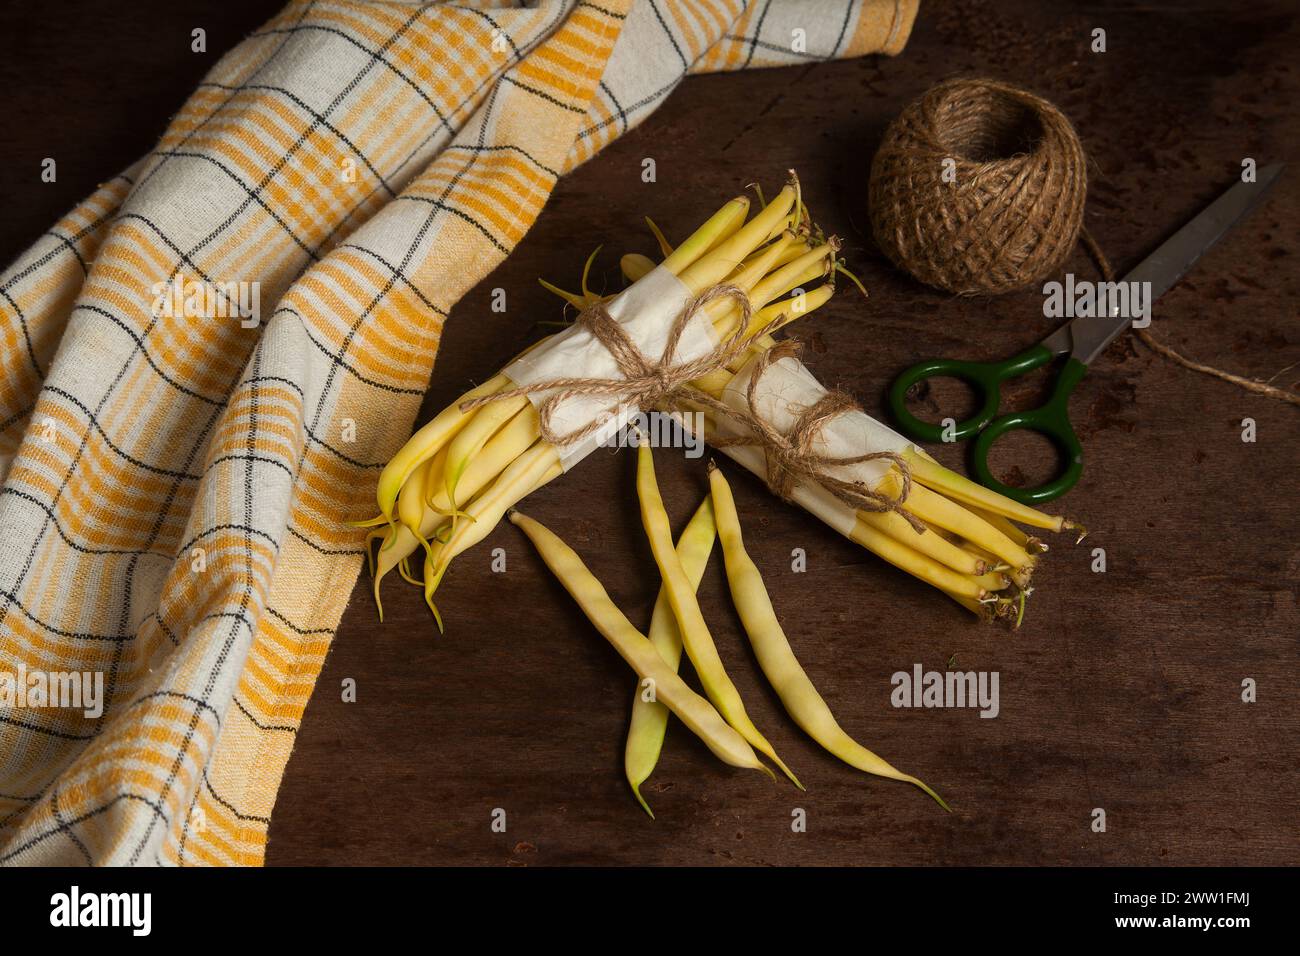 Two bunch and several pods of raw yellow pods of haricot with yellow kitchen towel, scissors and ball of thread on wooden background. French beans or Stock Photo